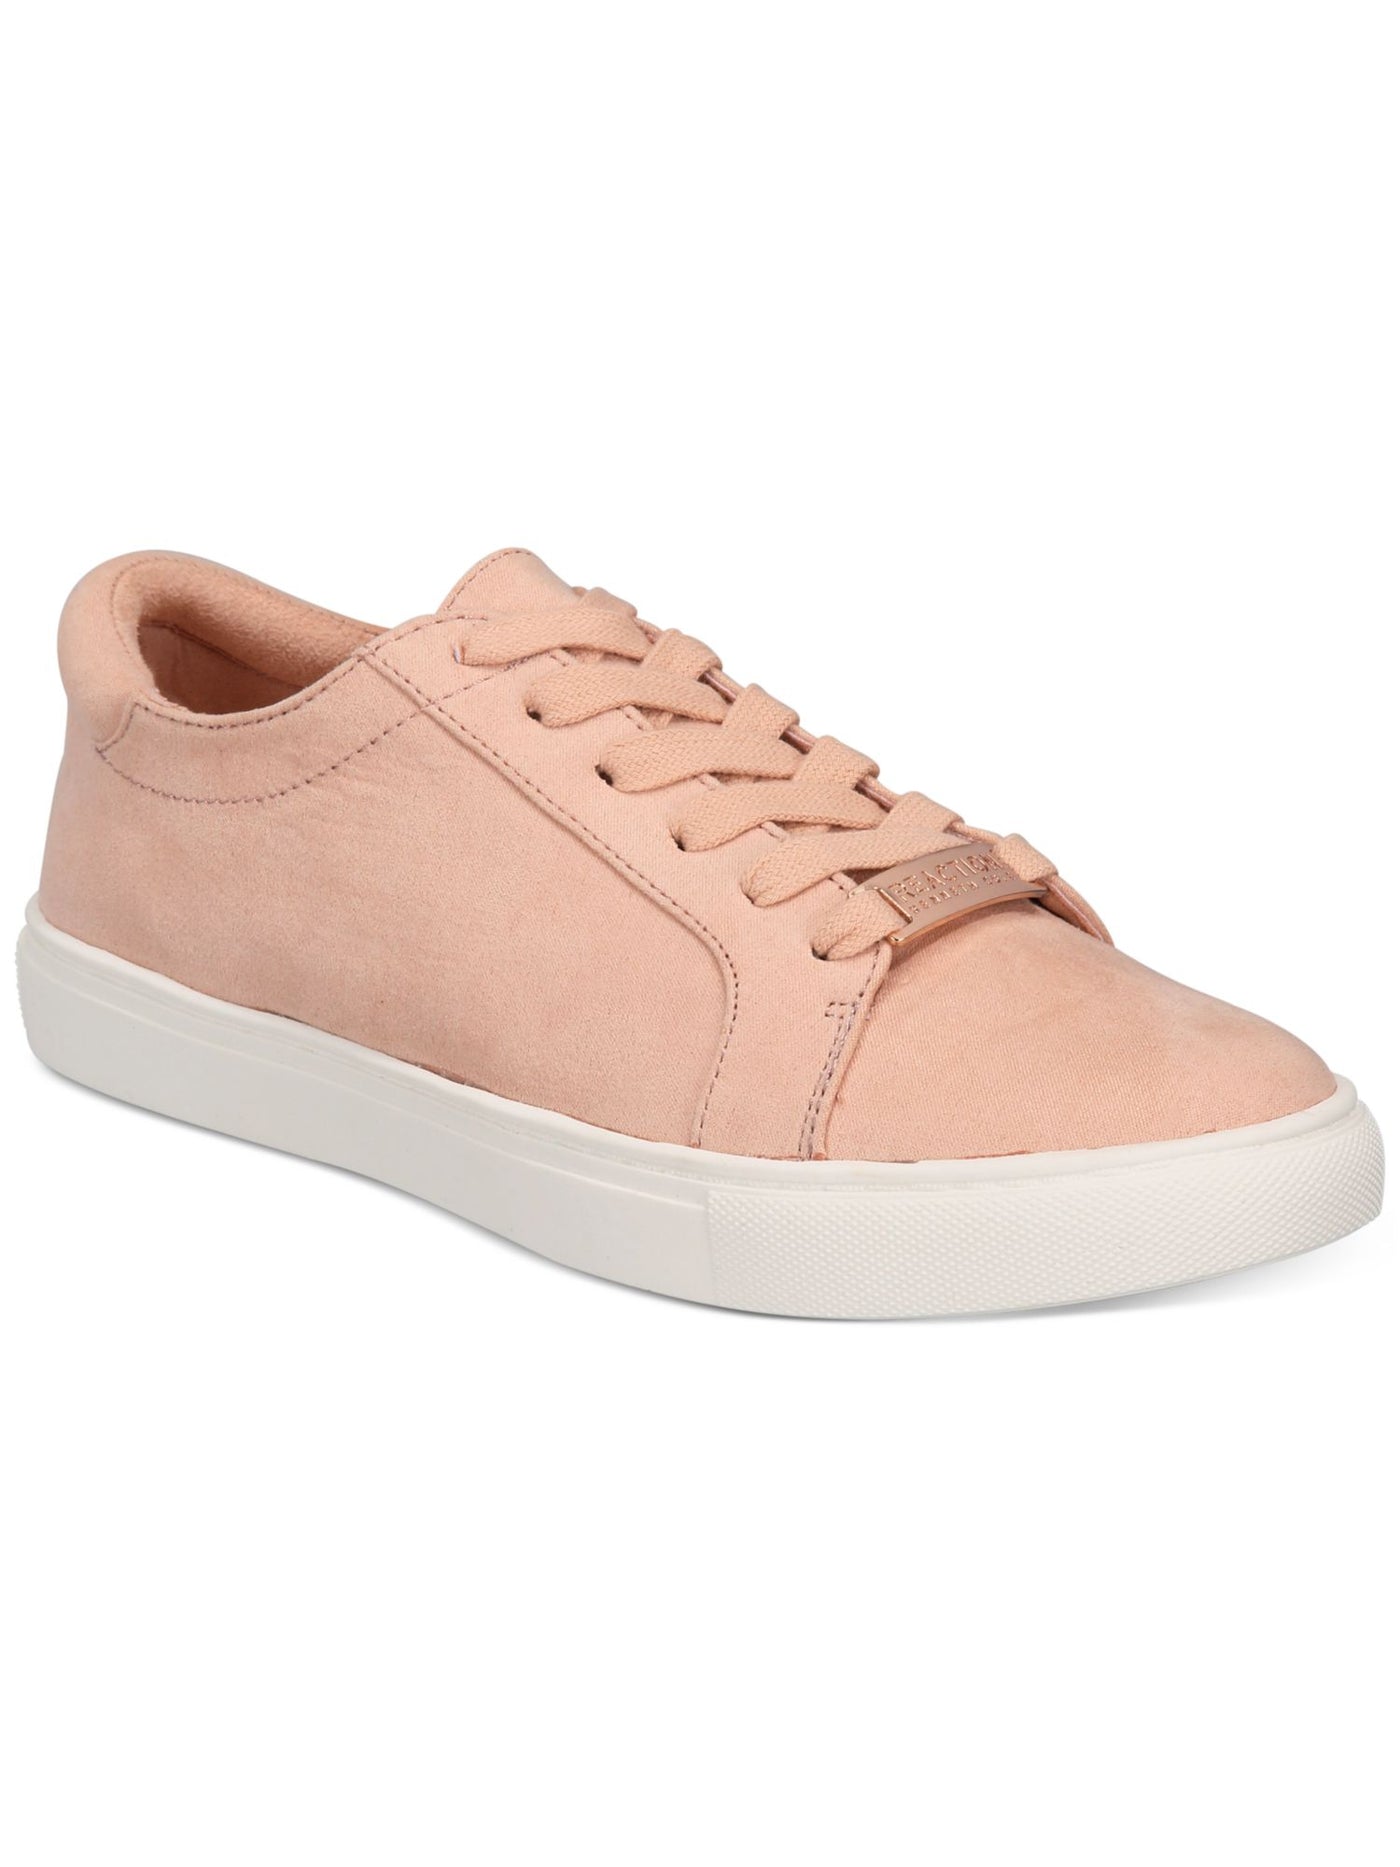 KENNETH COLE Womens Pink Metallic Logo Accent Cushioned Joey 5 Round Toe Platform Lace-Up Athletic Sneakers Shoes 9.5 M